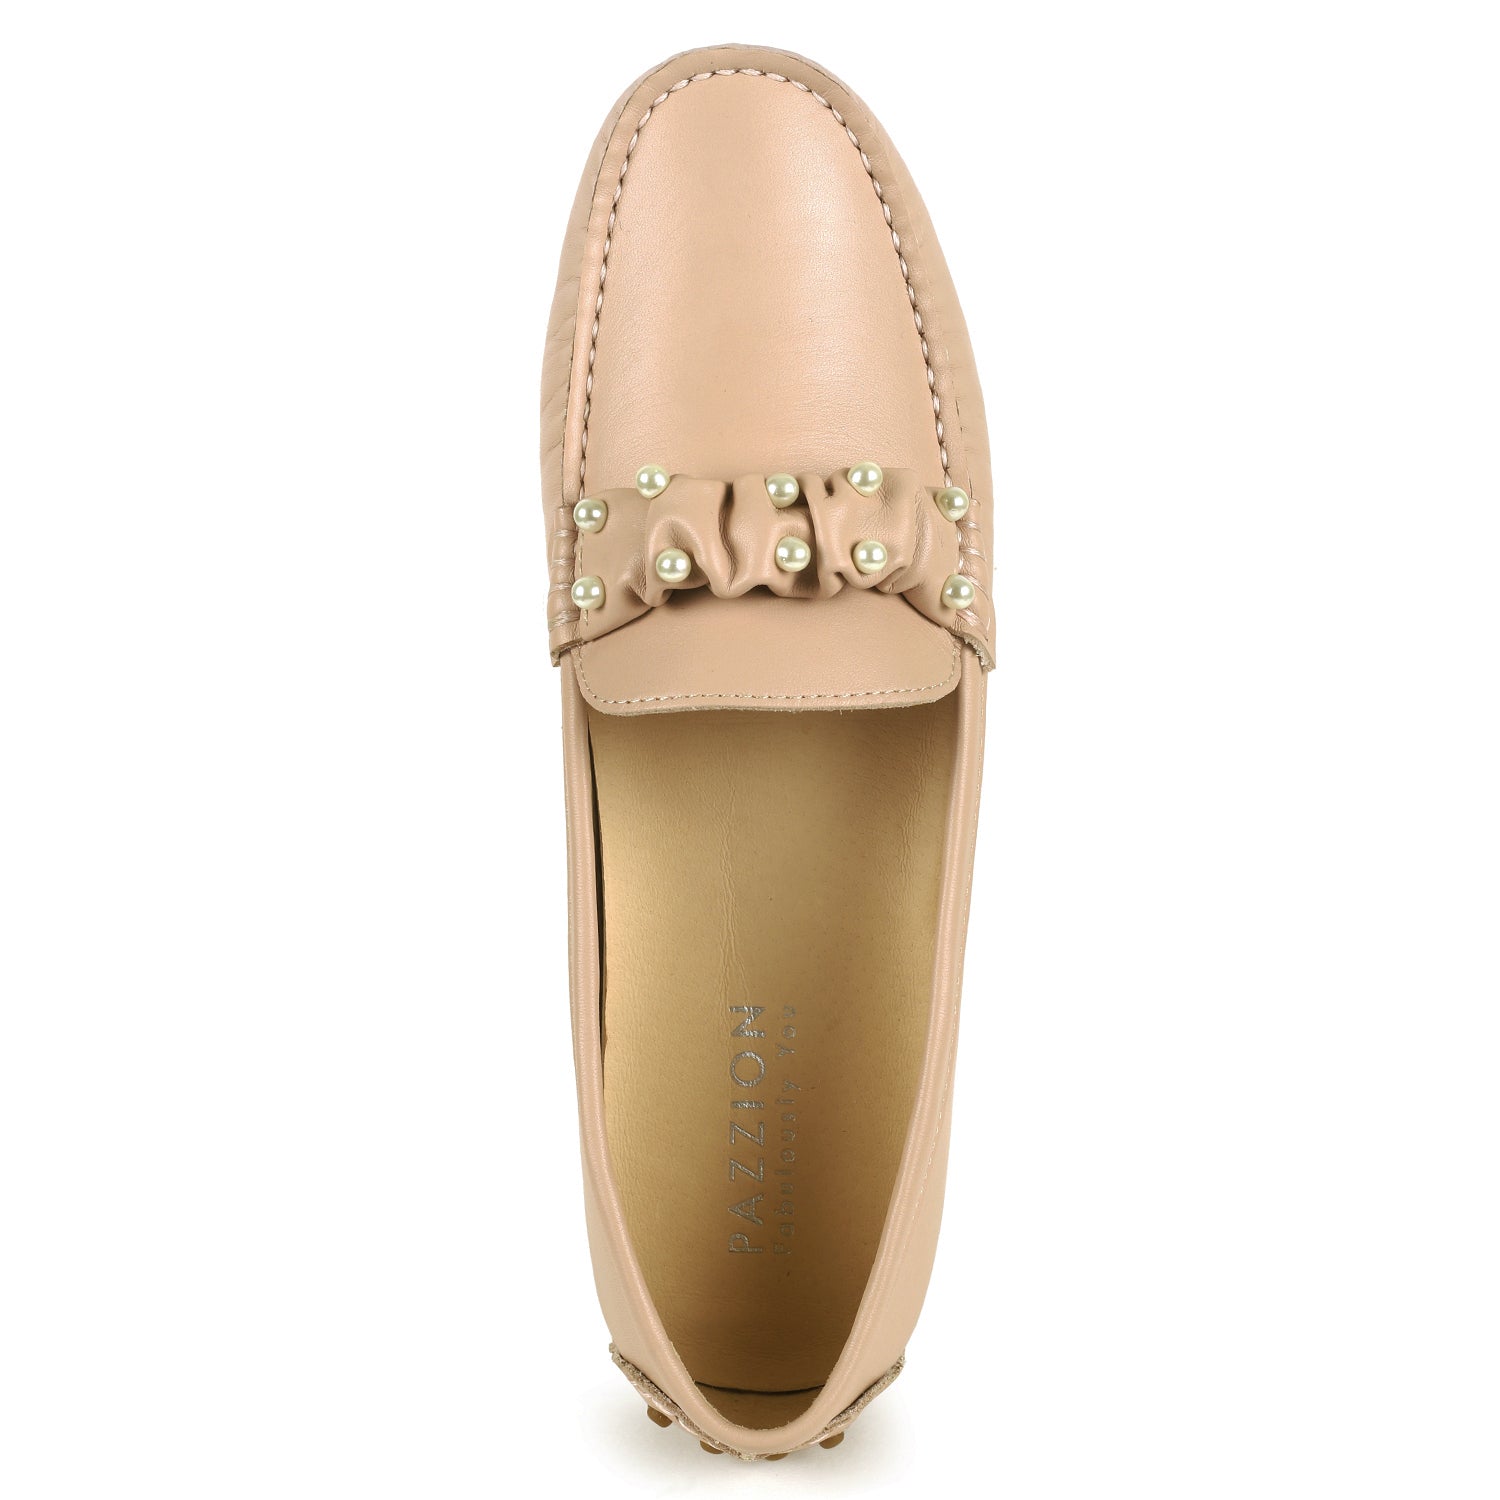 W613-12 Annalise Ruched Pearl Moccasins Loafer - Almond